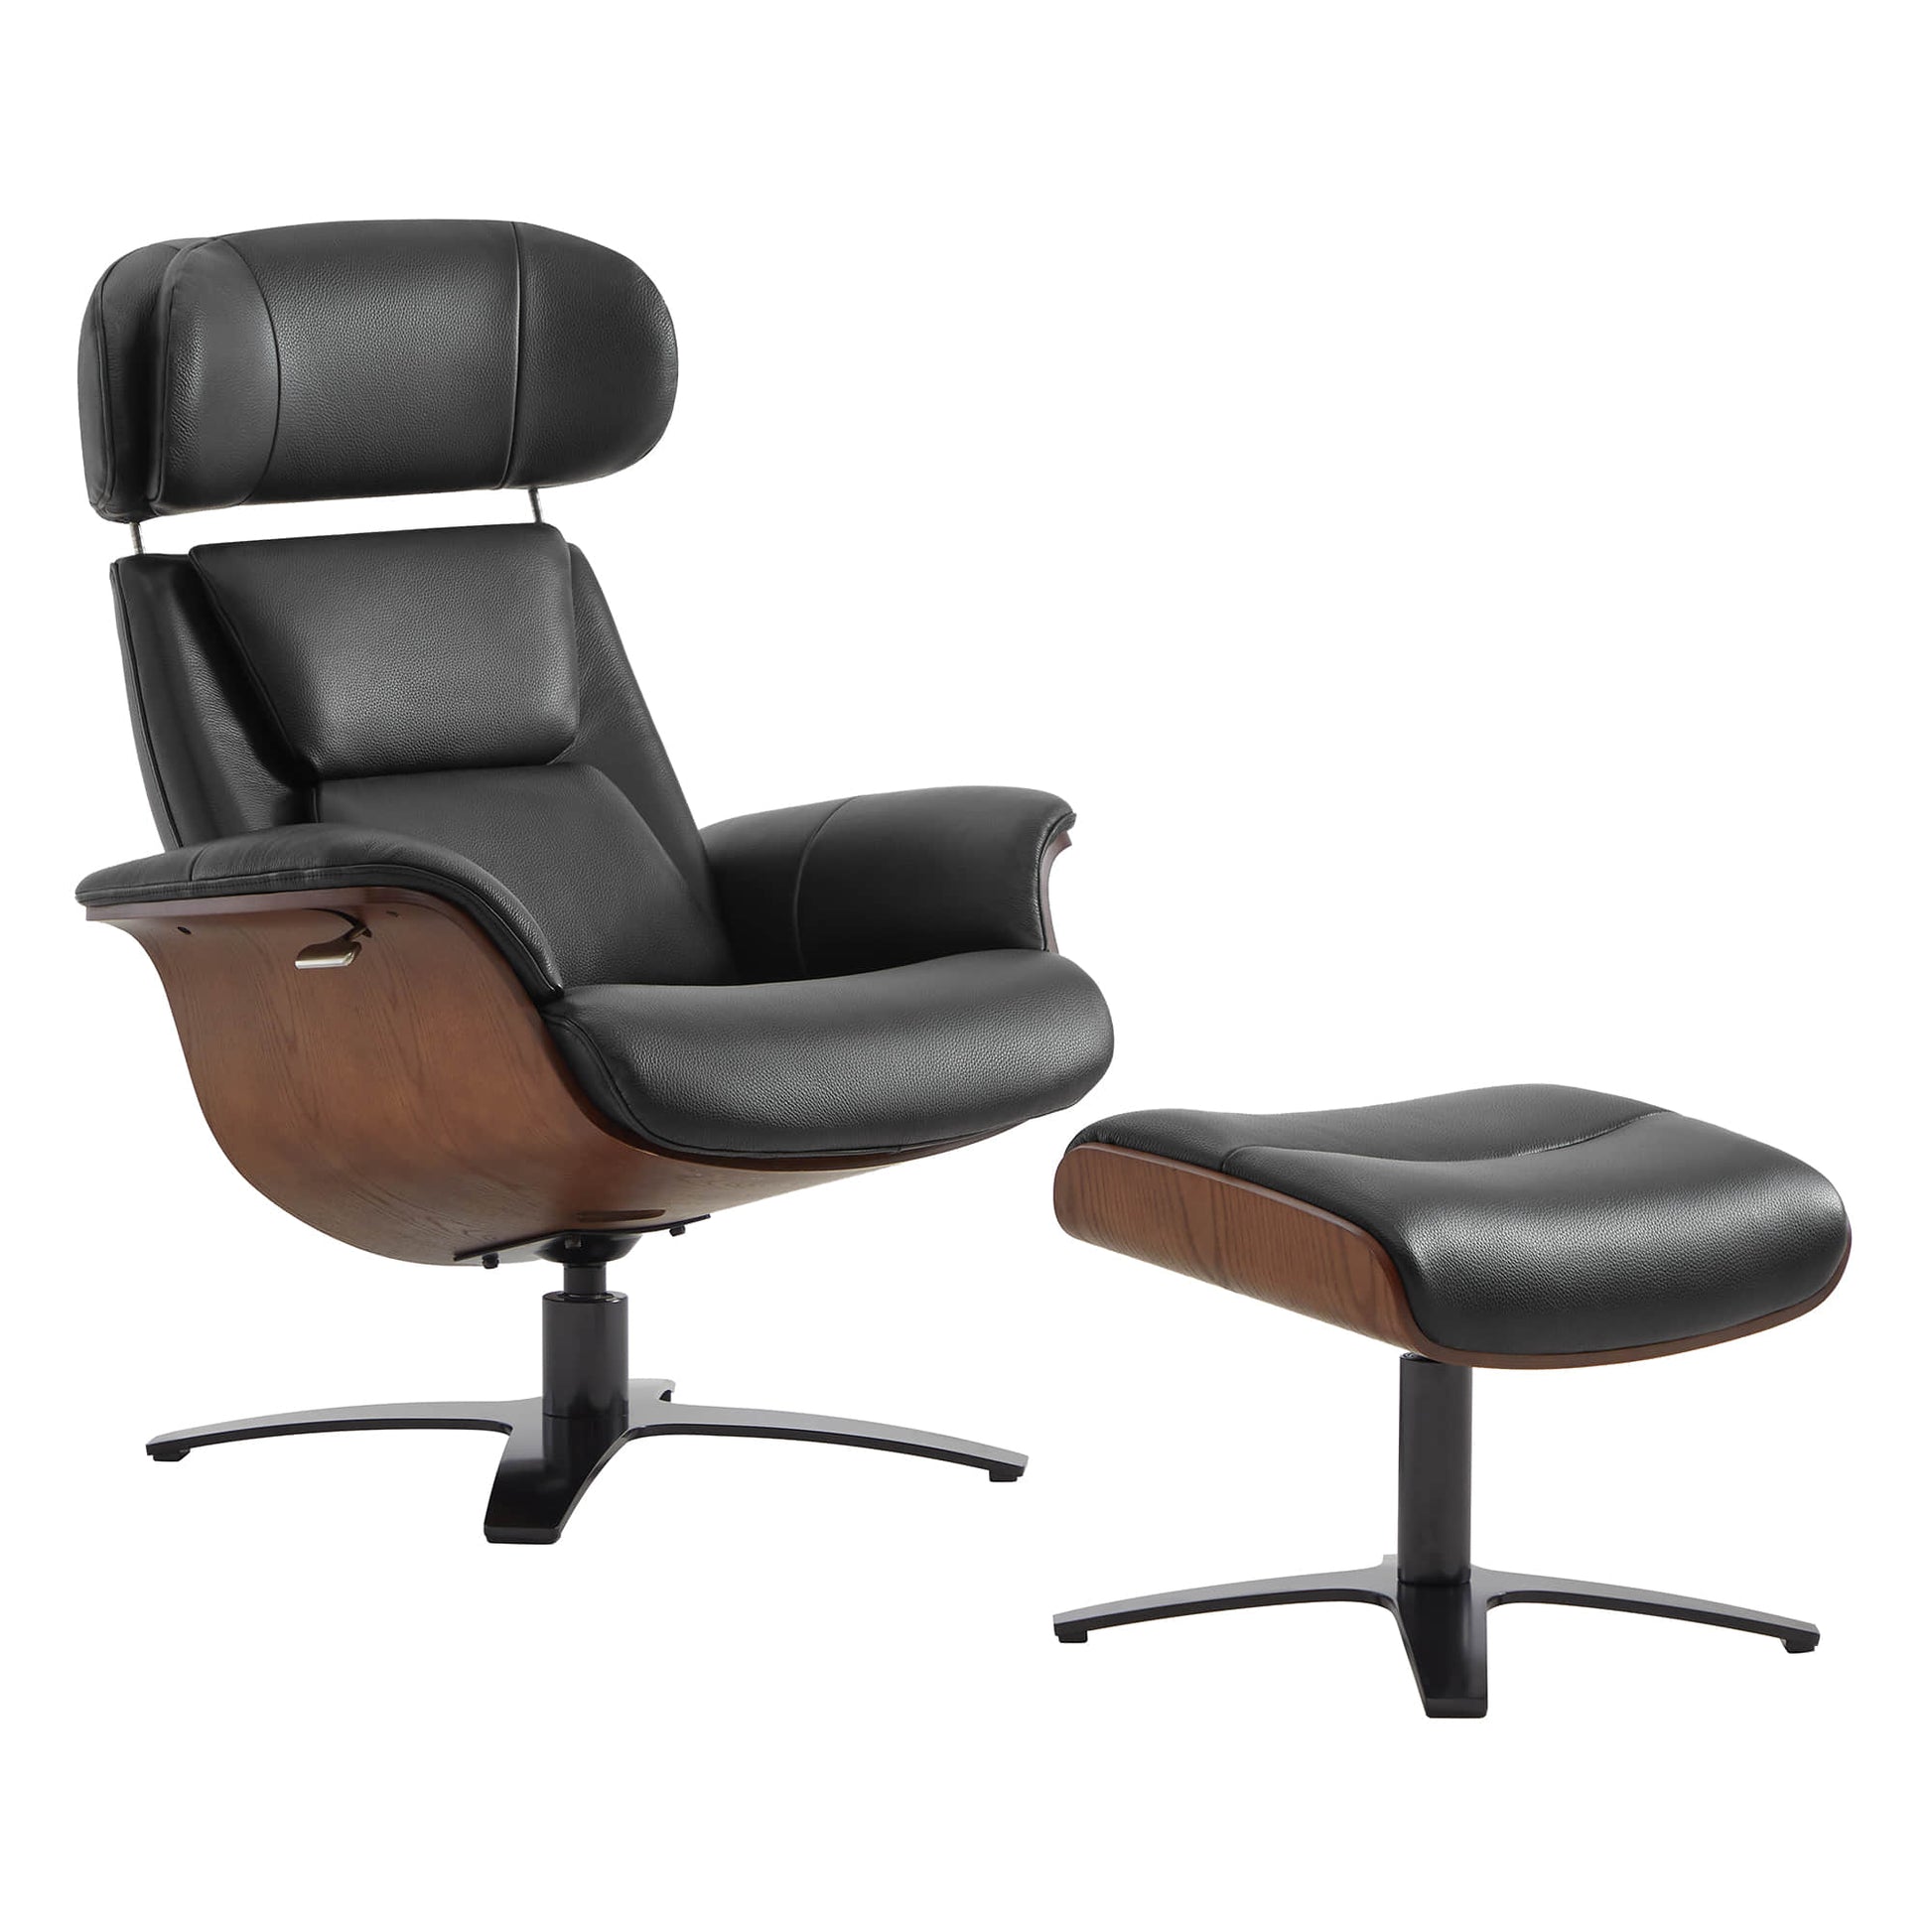 CHITA LIVING-Elvin Leather Recliner & Ottoman-Recliners-Genuine Top-grain Leather-Black-